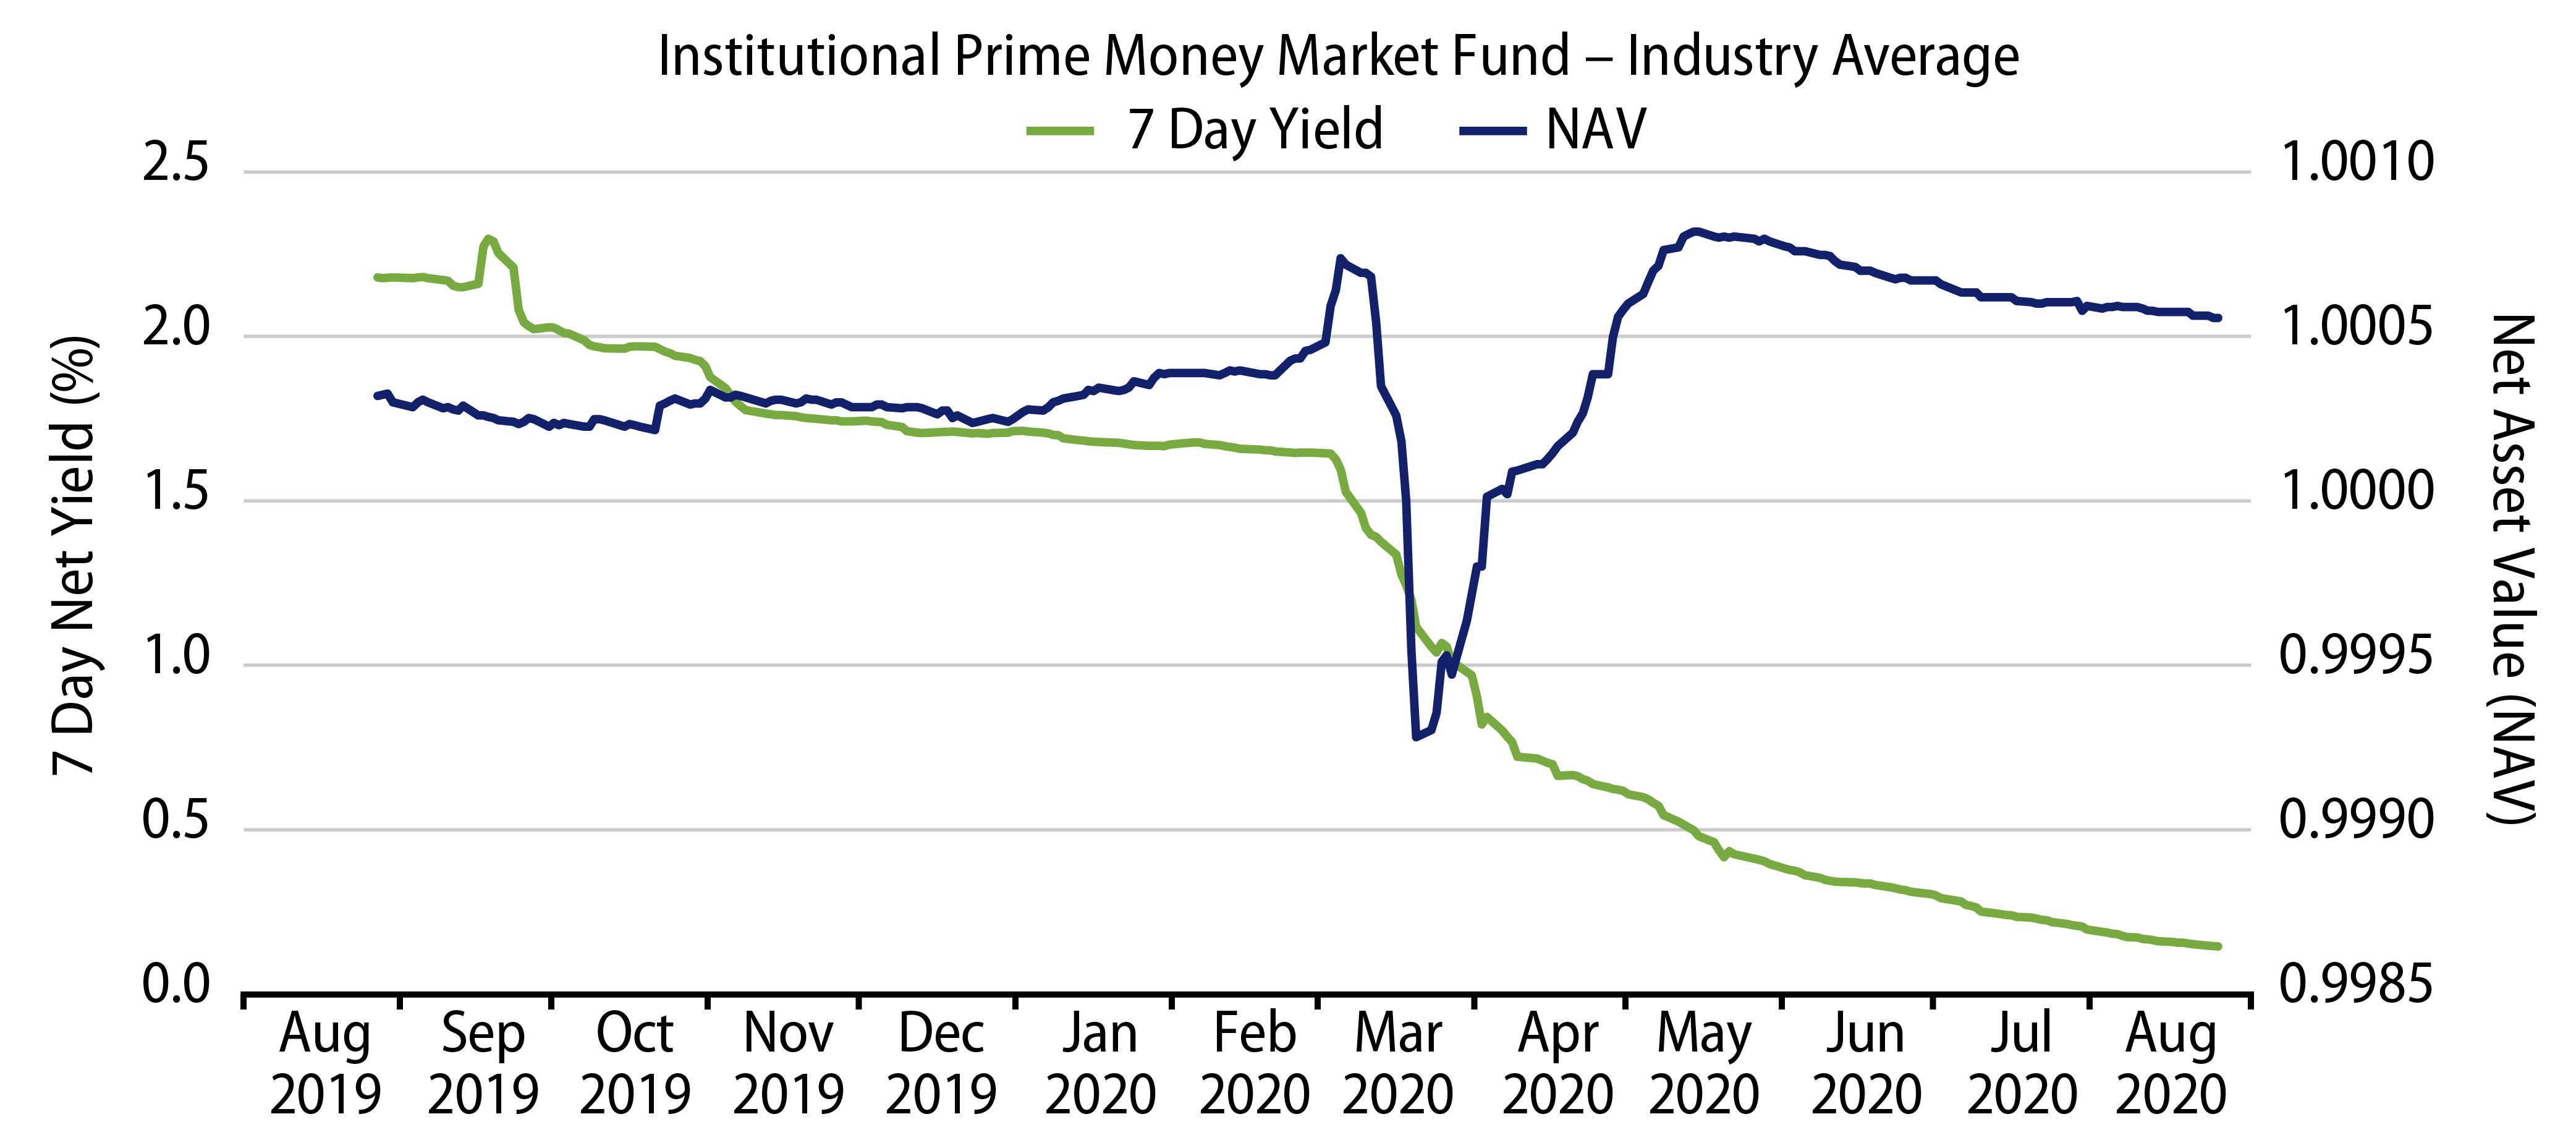 Explore Average NAV and 7-Day Yield of Institutional Prime Money Market Funds.